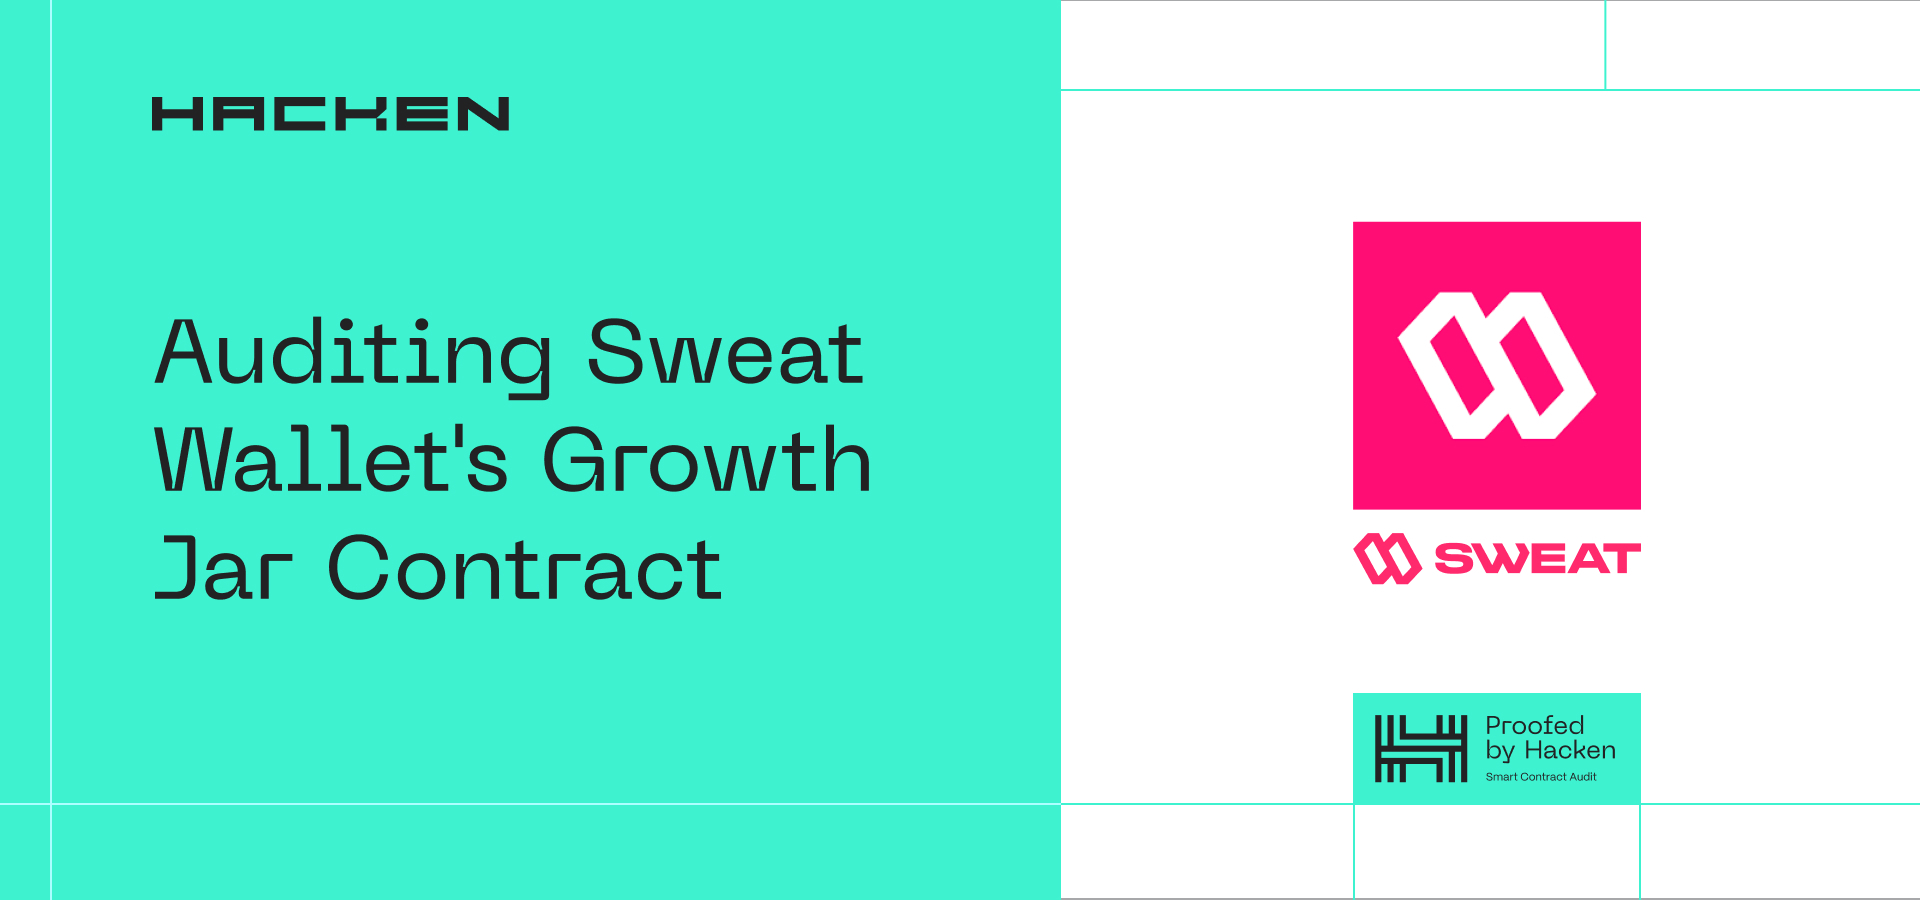 Auditing Sweat Wallet’s Growth Jar Contract: A Case Study